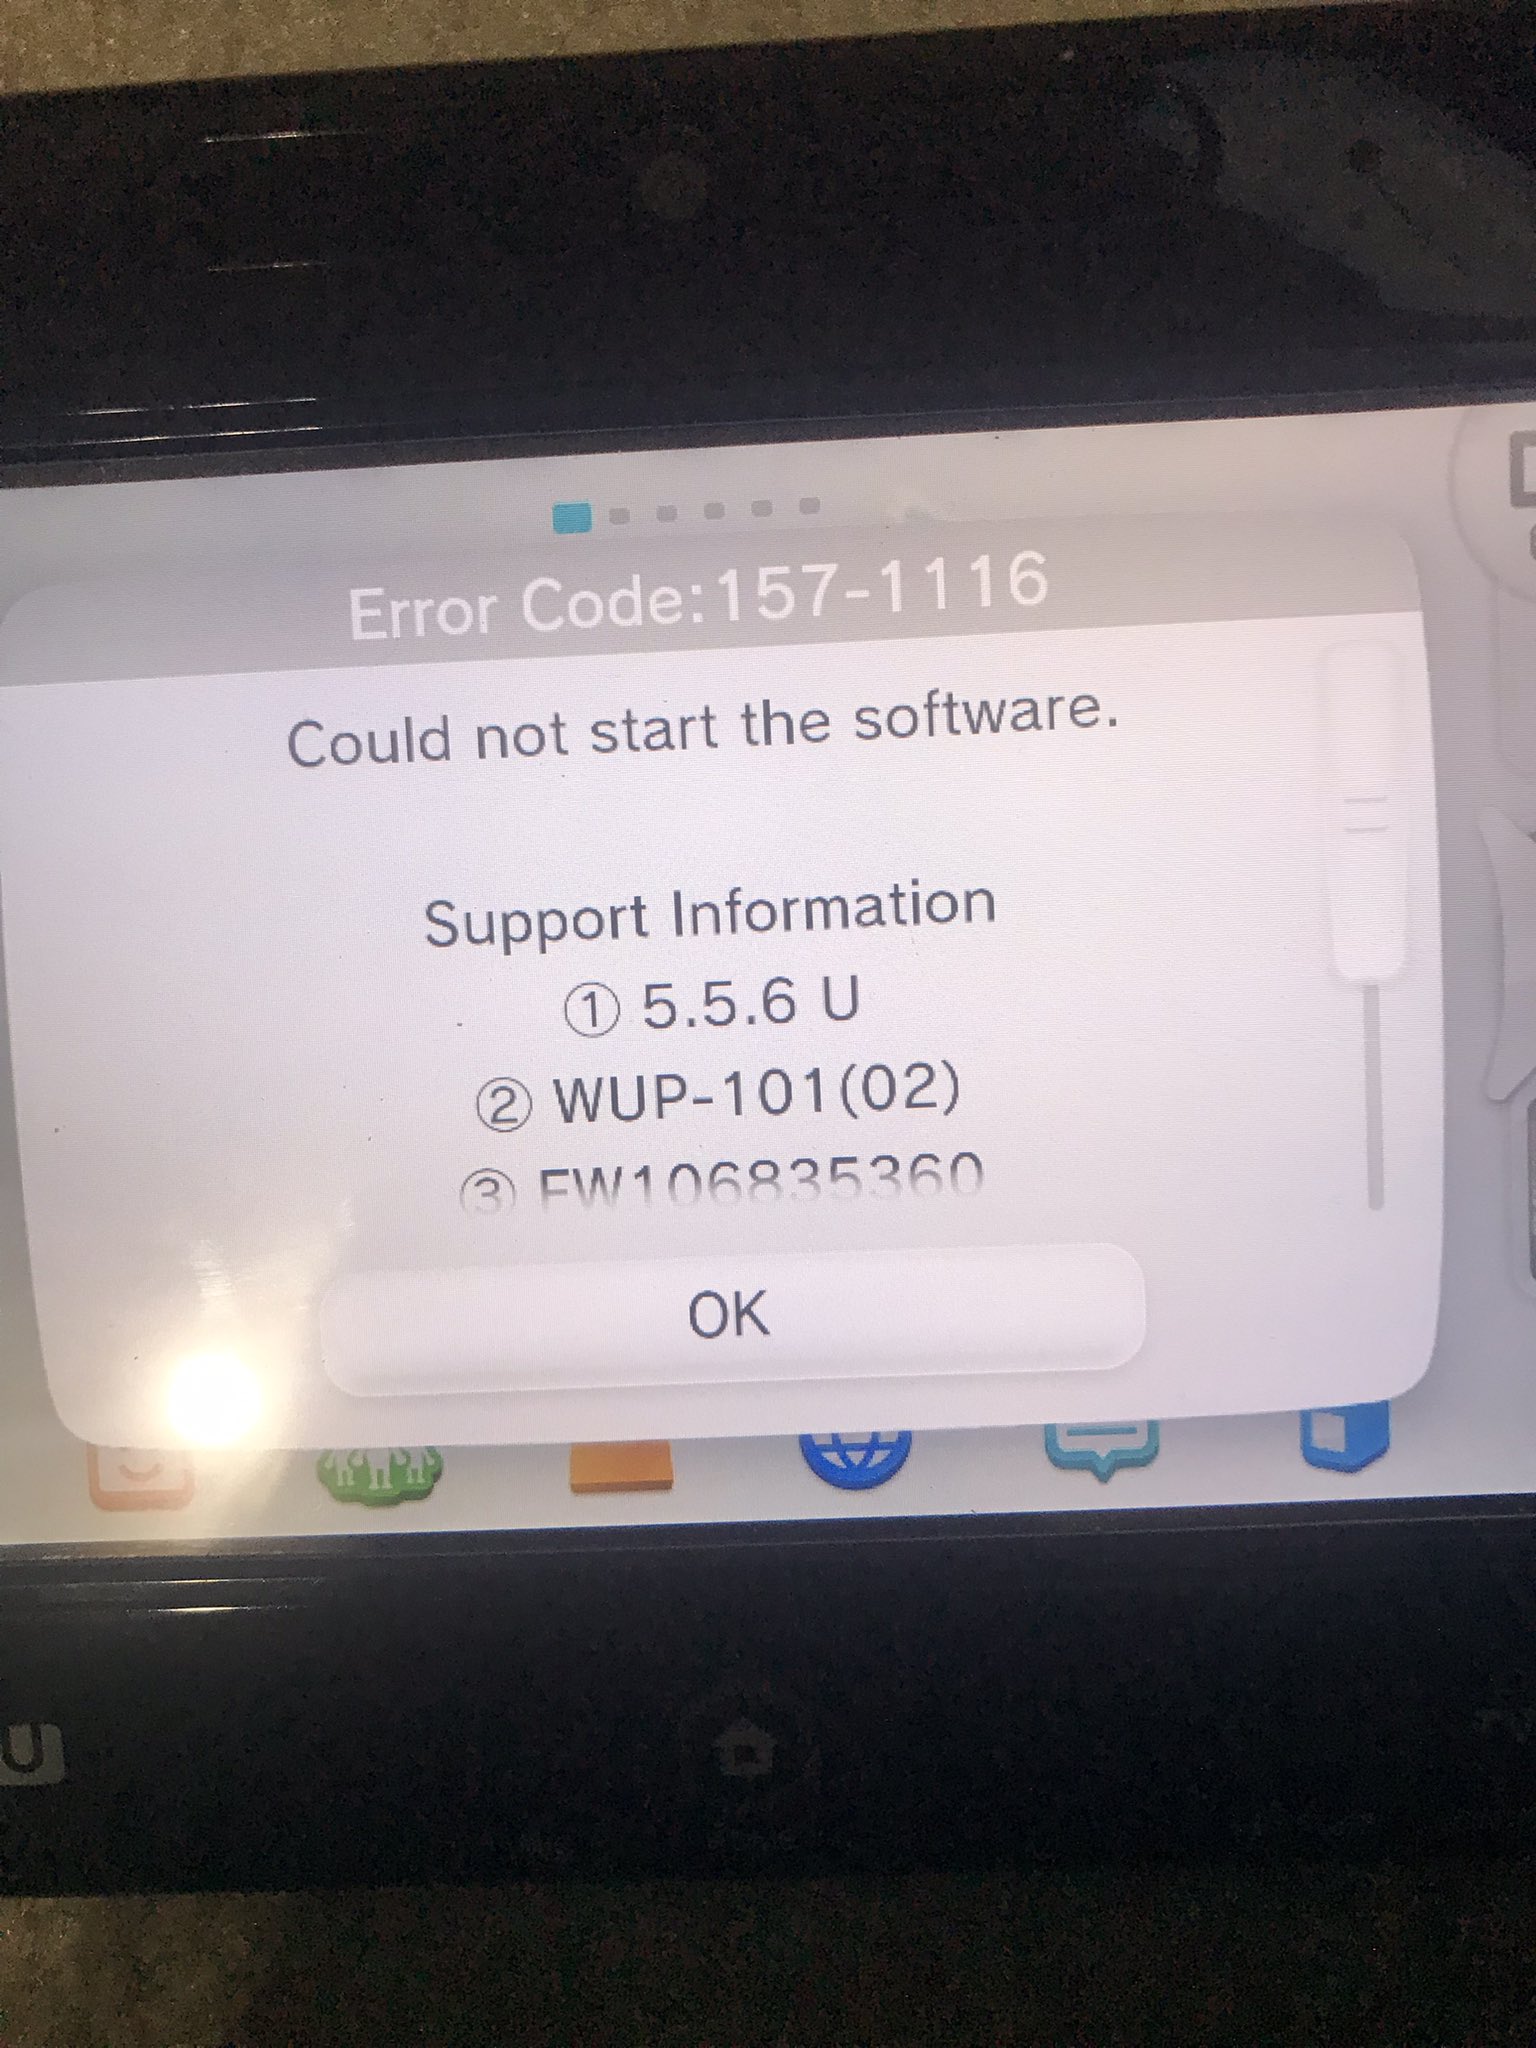 rotatie Dempsey bronzen AJ on X: "hi so im having a situation, whenever i insert ANY wii u disk it  shows tje name of the game then gives this error. any tips? especially  since most